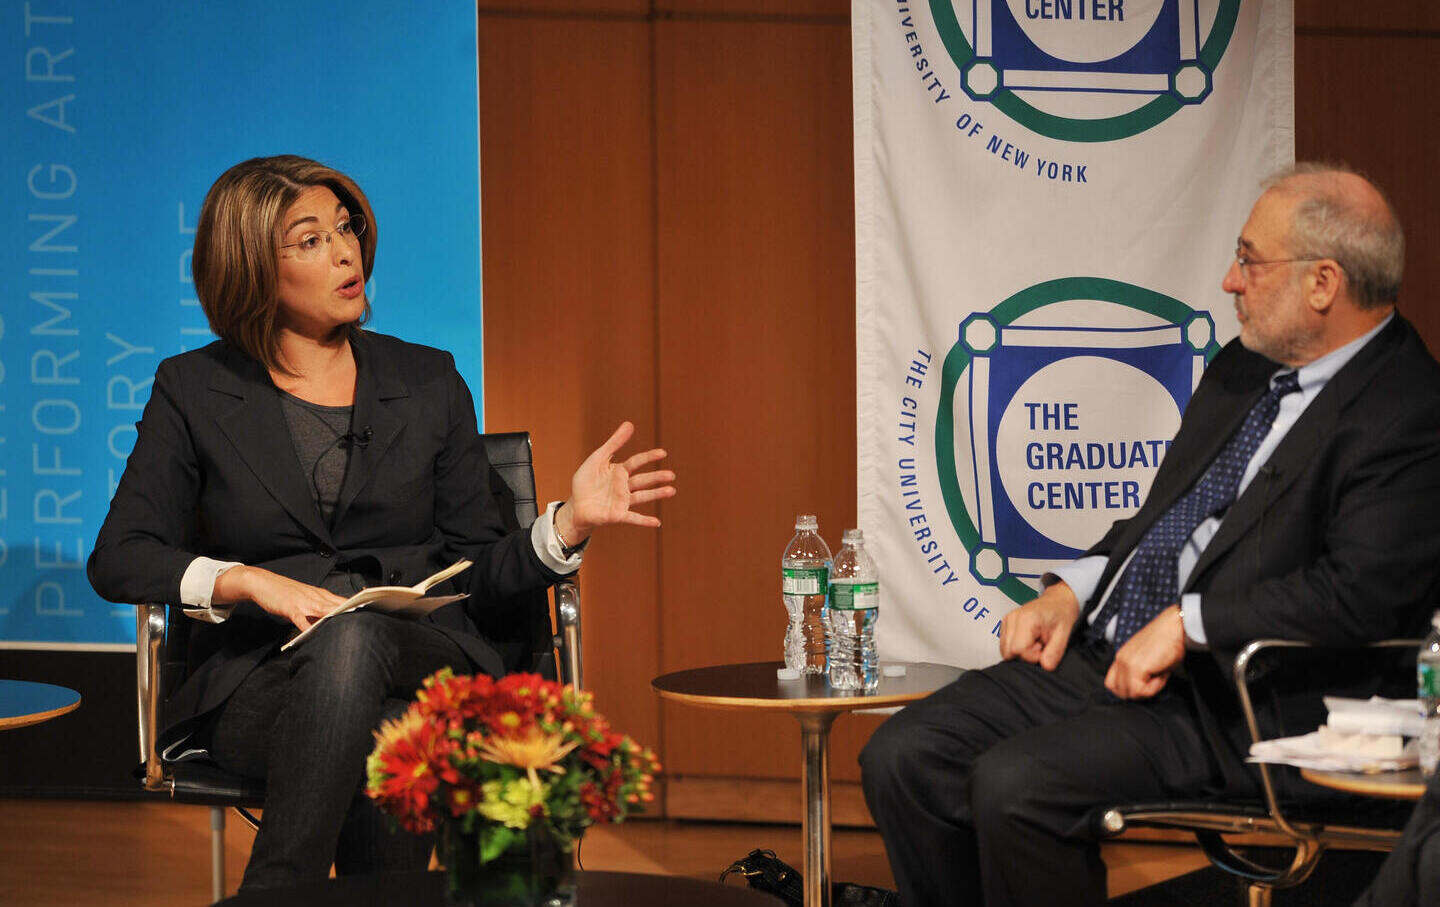 US journalist Naomi Klein (L), columnist for The Nation and The Guardian and the author of “The Shock Doctrine: The Rise of Disaster Capitalism,” speaks as Joseph Stiglitz, Nobel Prize–winning economist and University Professor at Columbia University, listens at a debate on Economic Power on October 20, 2008, during the Great Issues Forum at the Graduate Center of the City University of New York in New York.